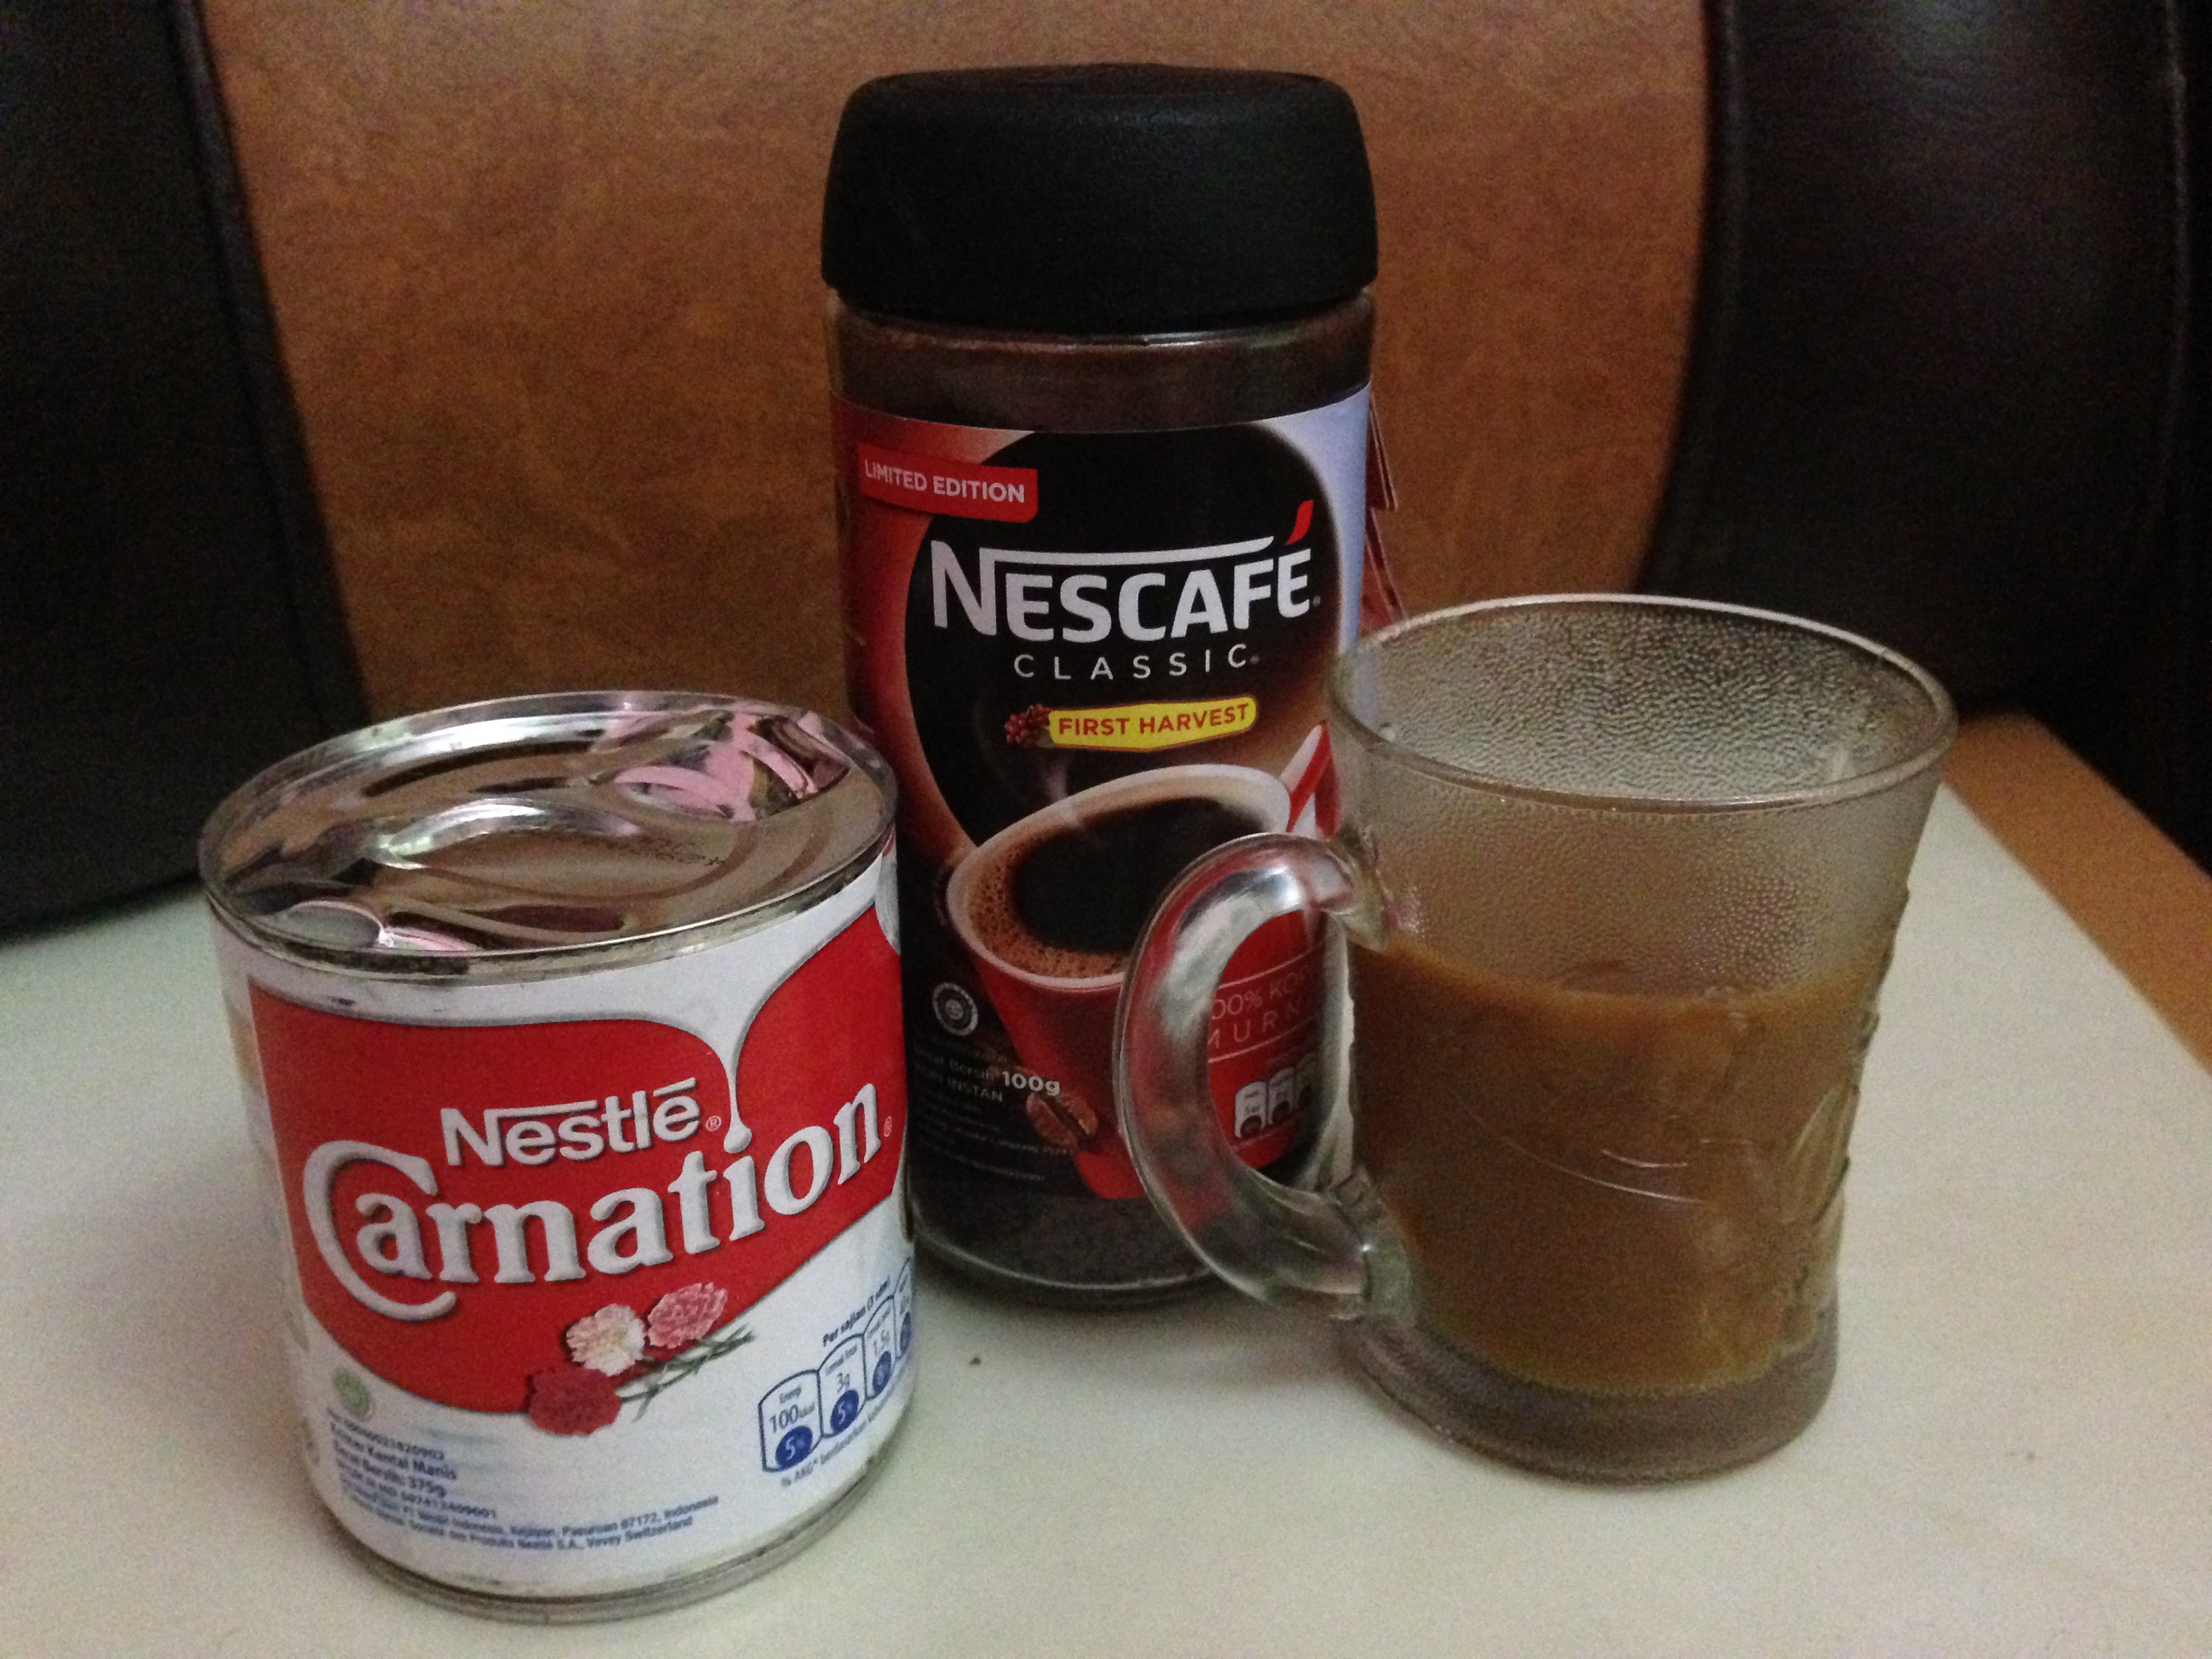 Nescafe Classic First Harvest + Carnation